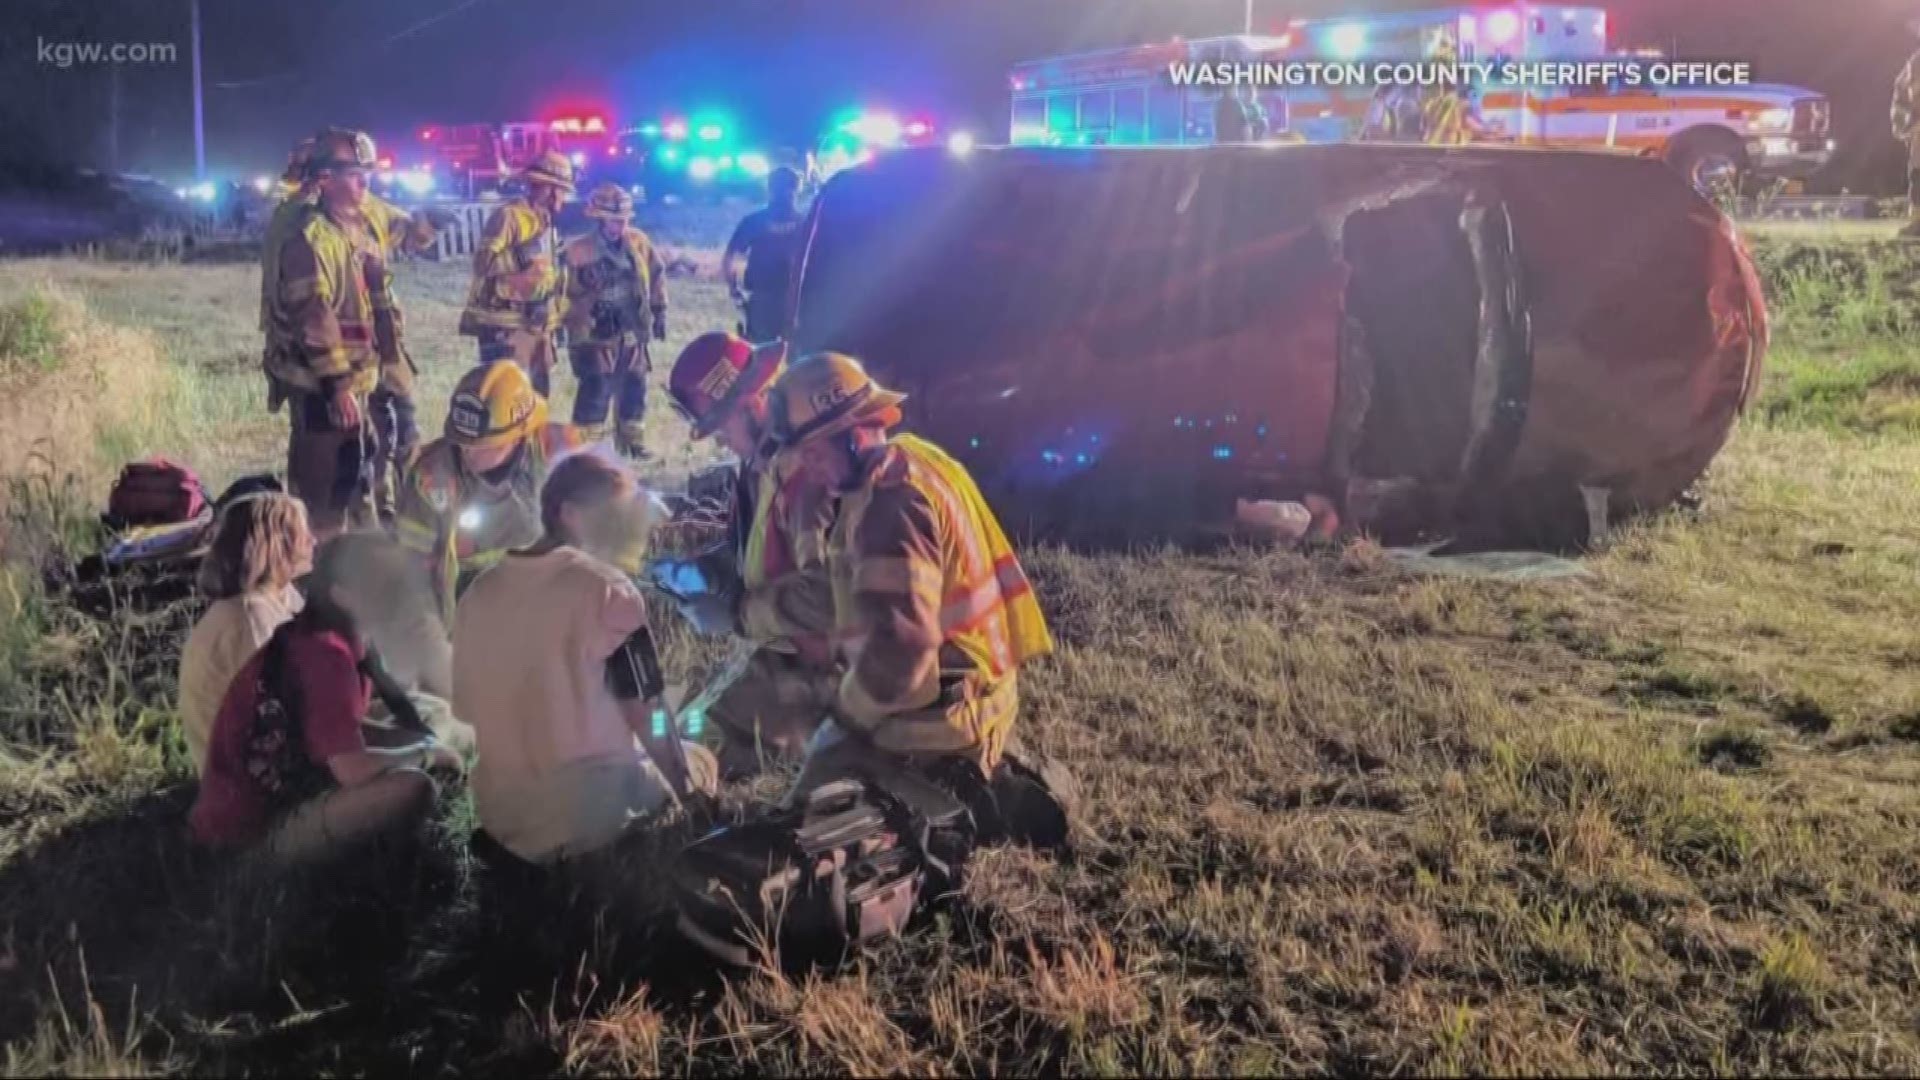 Four people – a father, his two daughters, and one of their friends – say they’re lucky to be alive after a hit-and-run crash on Highway 99, just south of Sherwood, Oregon. Police are still searching for the driver who fled the crash.